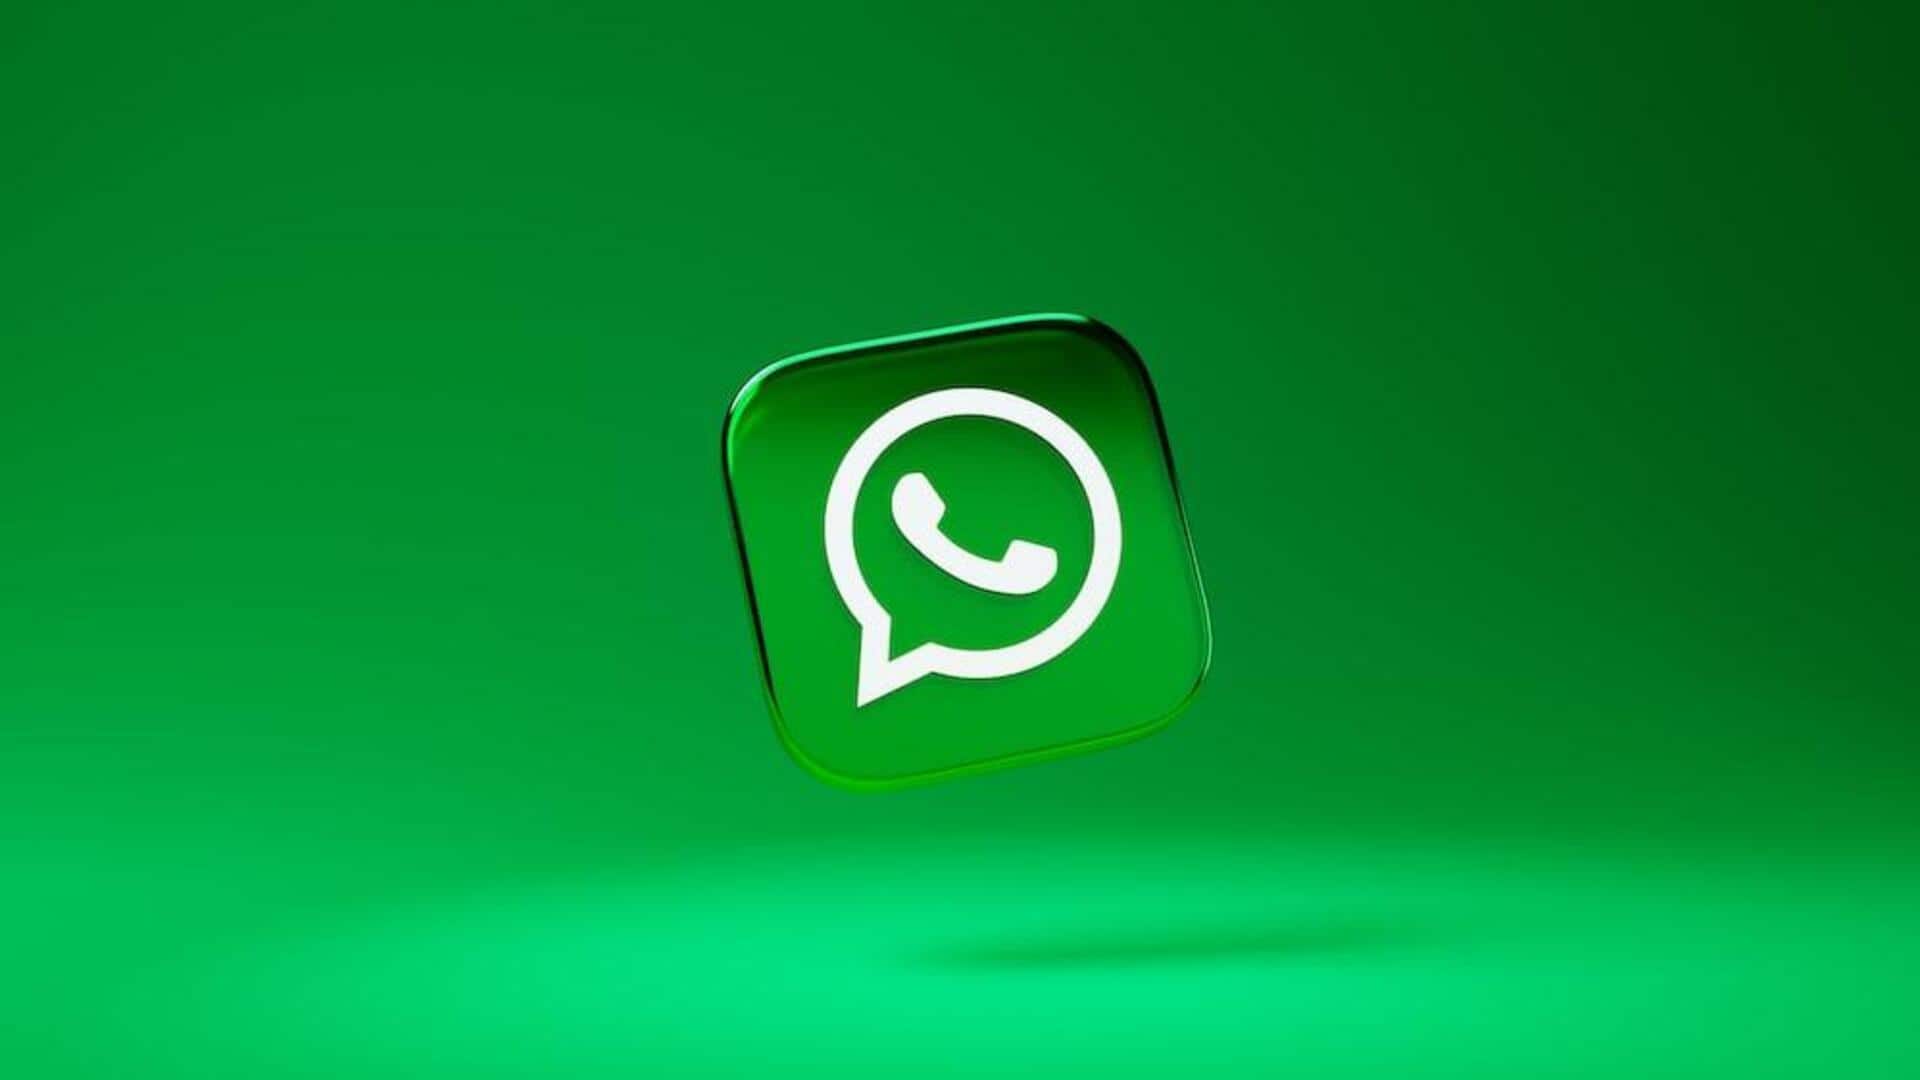 Latest WhatsApp update adds multi-account support for Android beta users